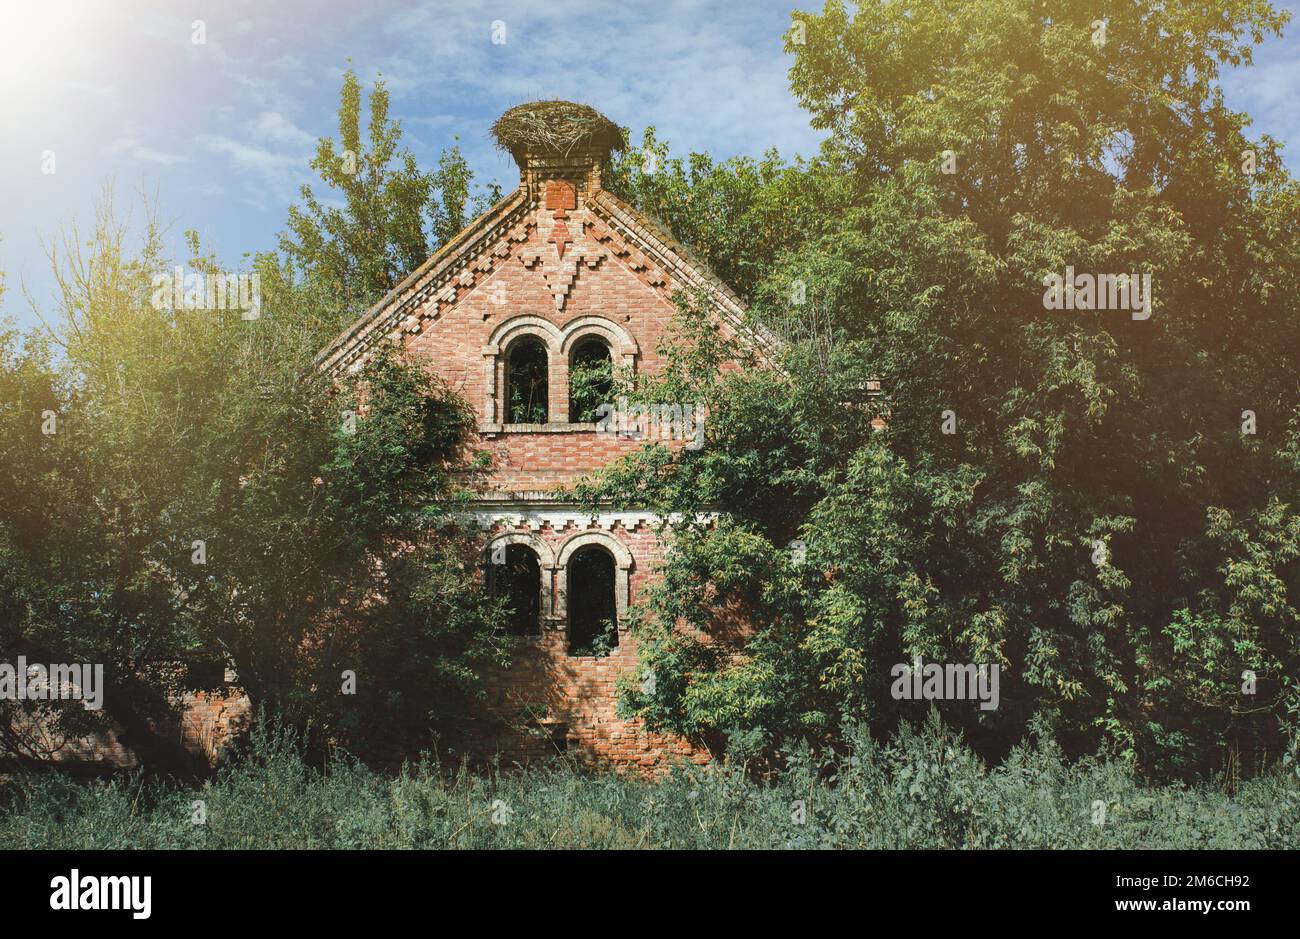 Abandoned and ruined Old brick mansion (house) in the forest Stock Photo